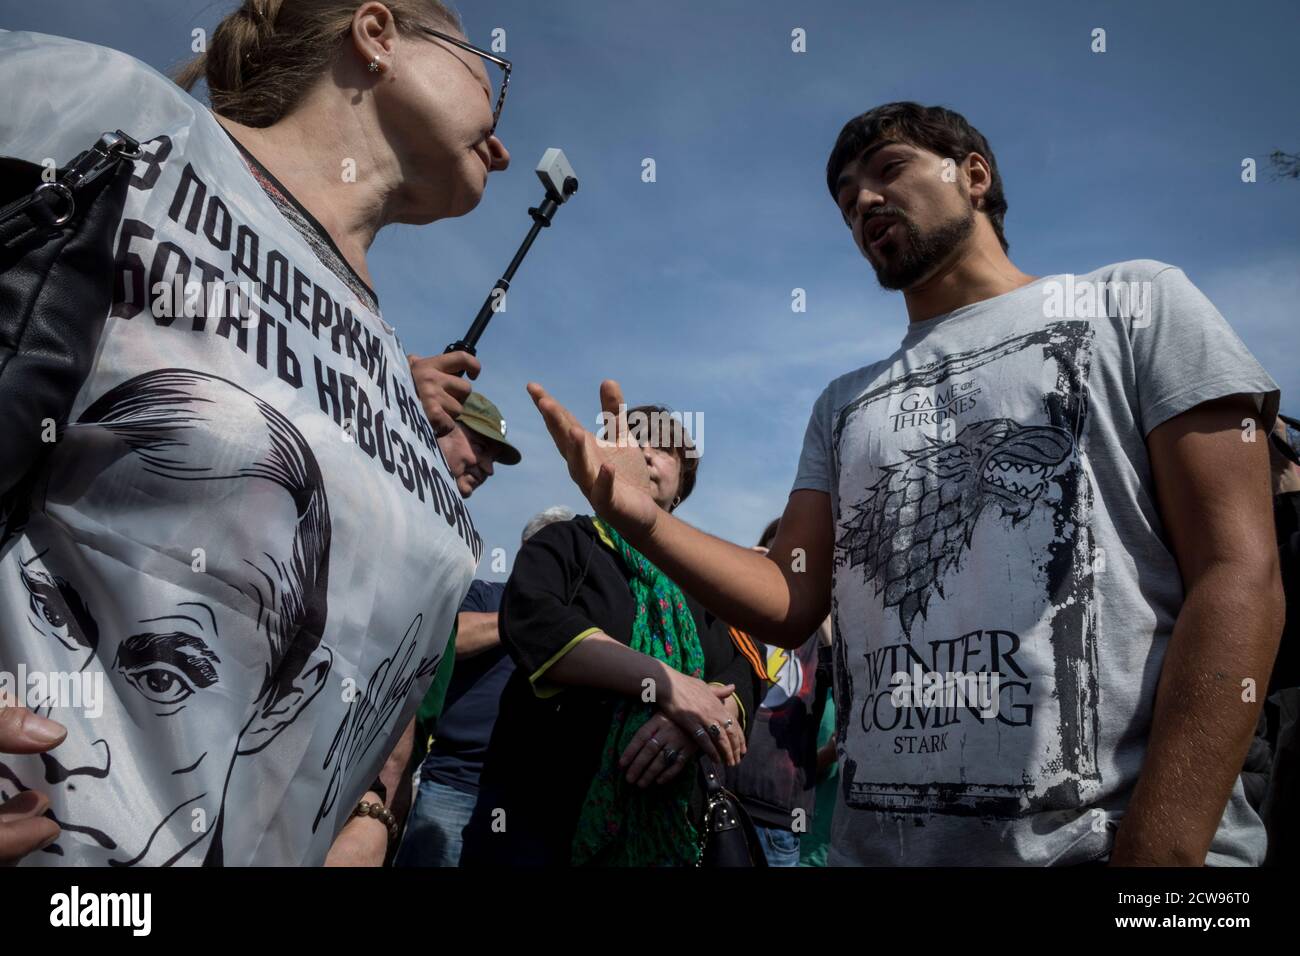 Moscow, Russia. 5th May, 2018. Confrontation between supporters and opponents of President Vladimir Putin during an unauthorized anti-Putin rally called by opposition leader Alexei Navalny in central Moscow, two days ahead of Vladimir Putin's inauguration for a fourth Kremlin term Stock Photo